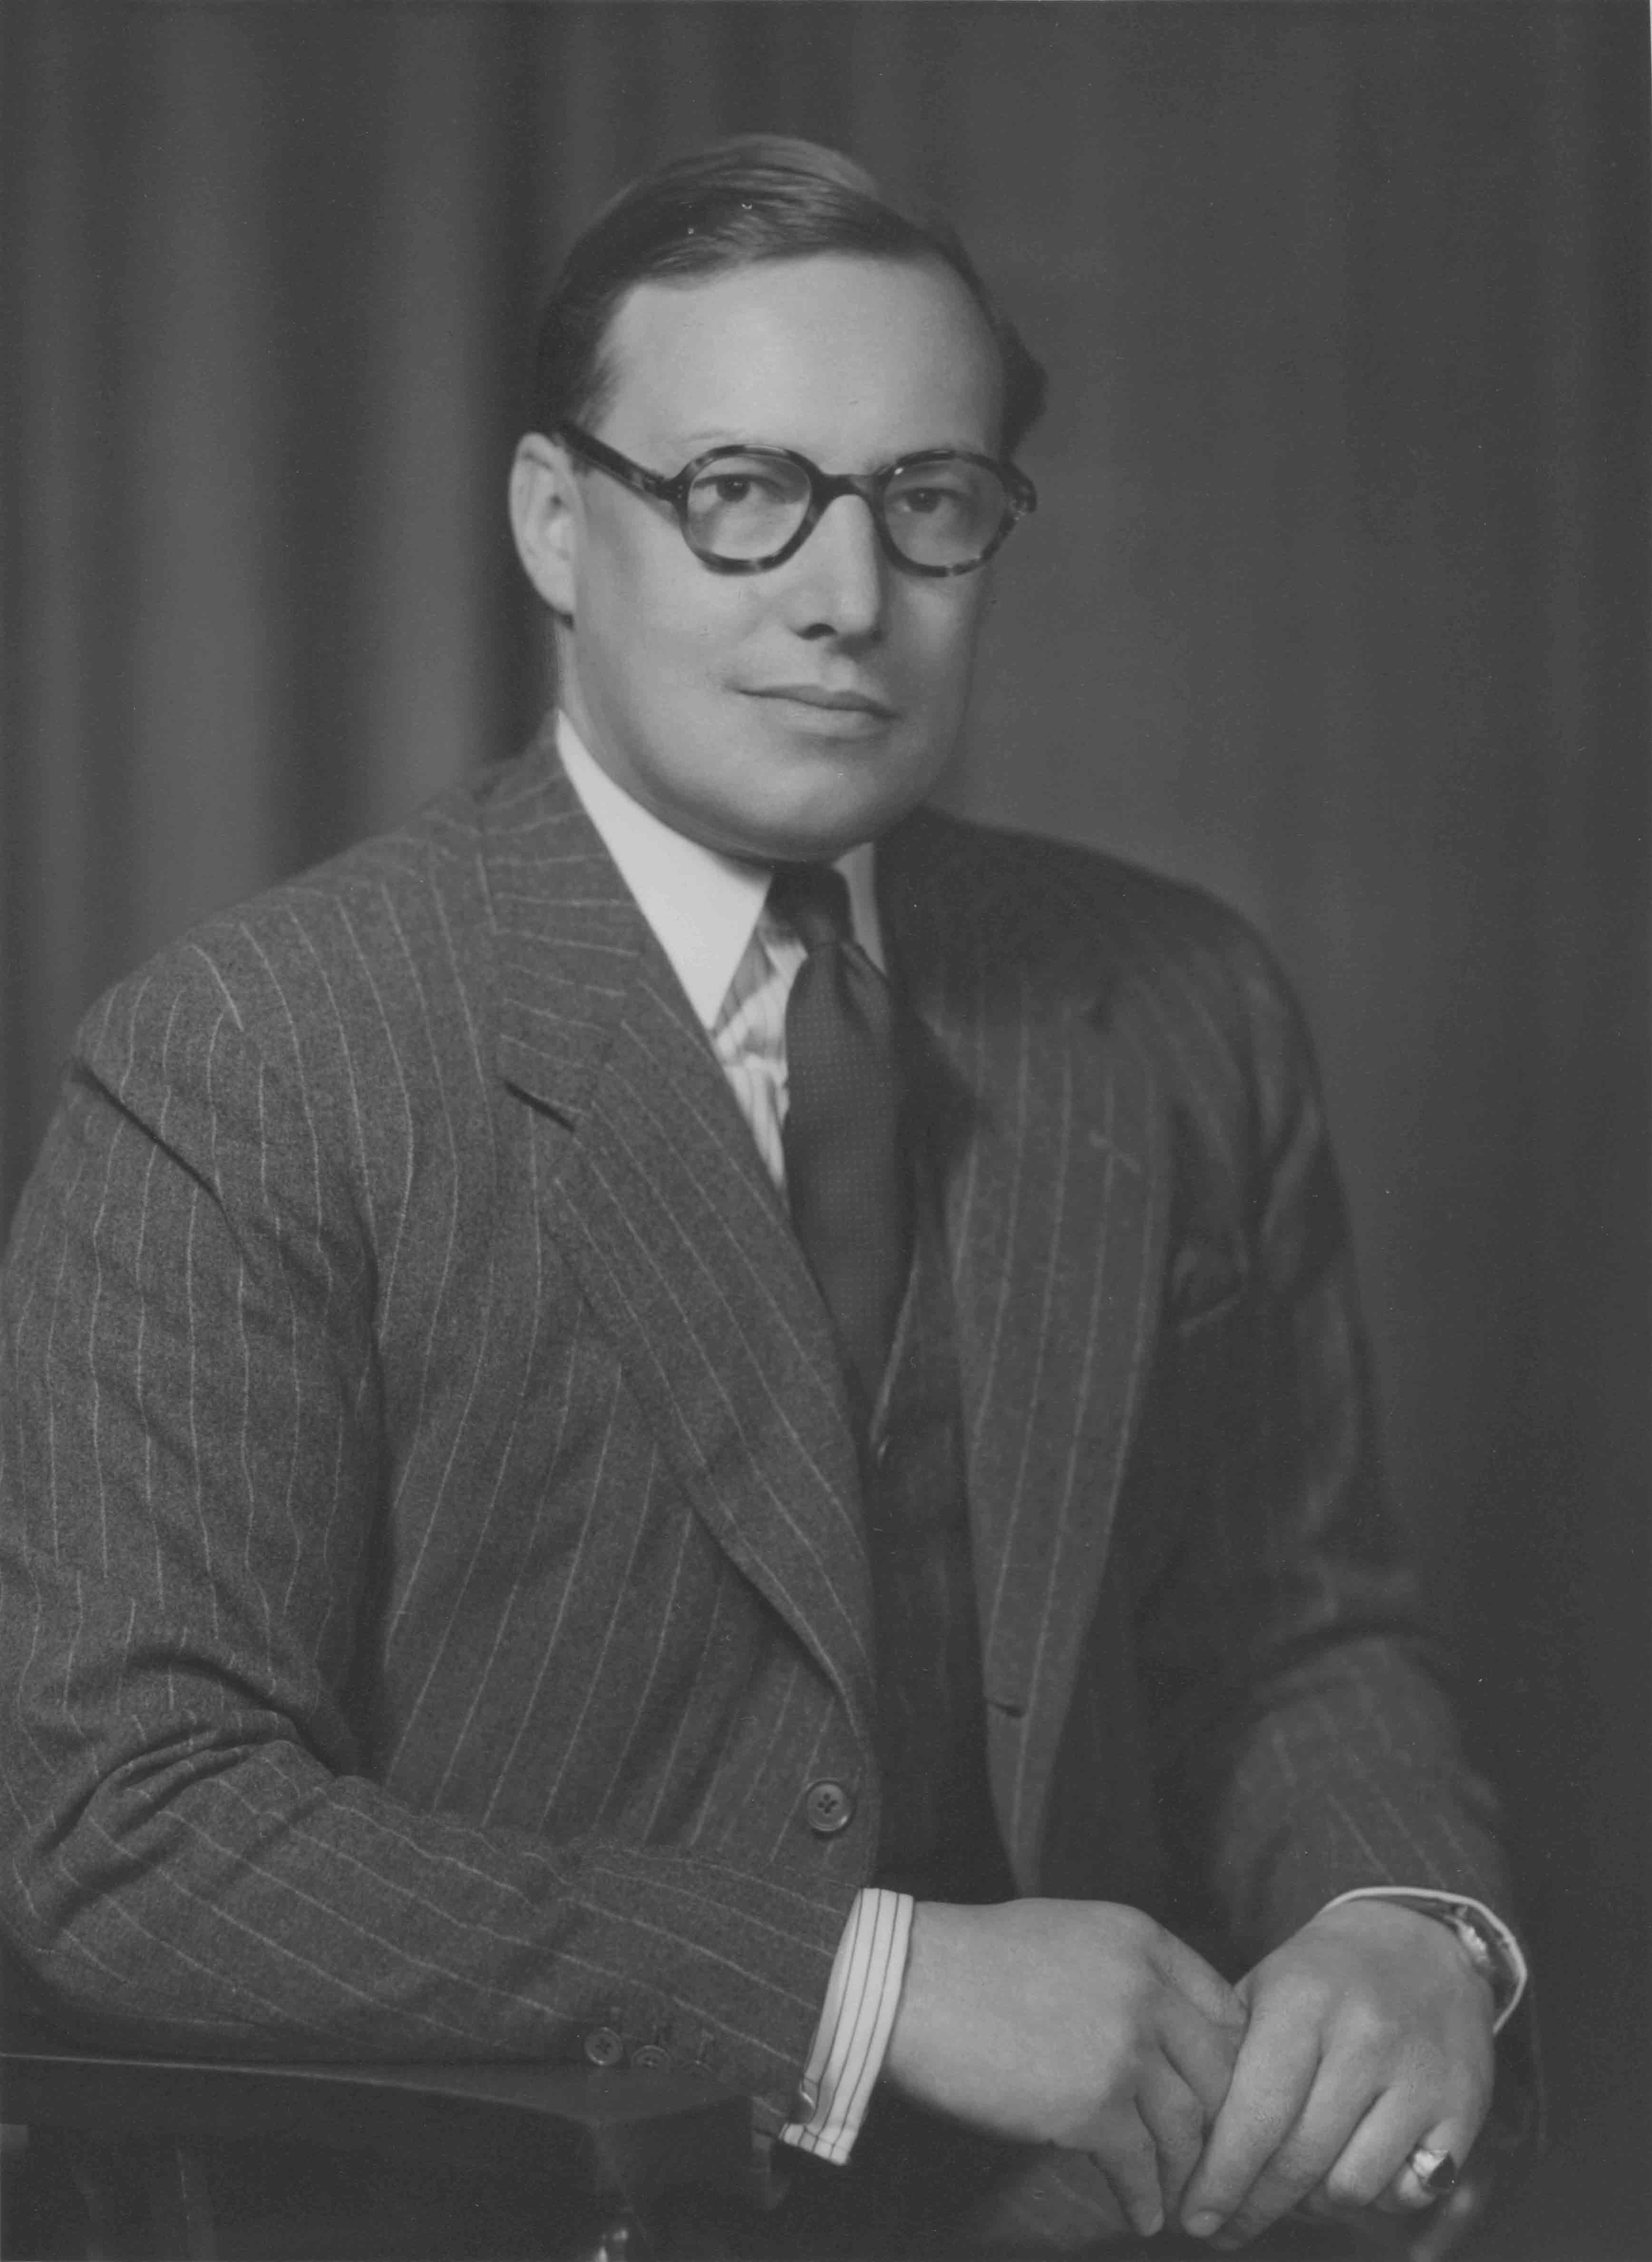 Portrait of Commander Terry Poulden wearing a pinstripe suit and glasses.